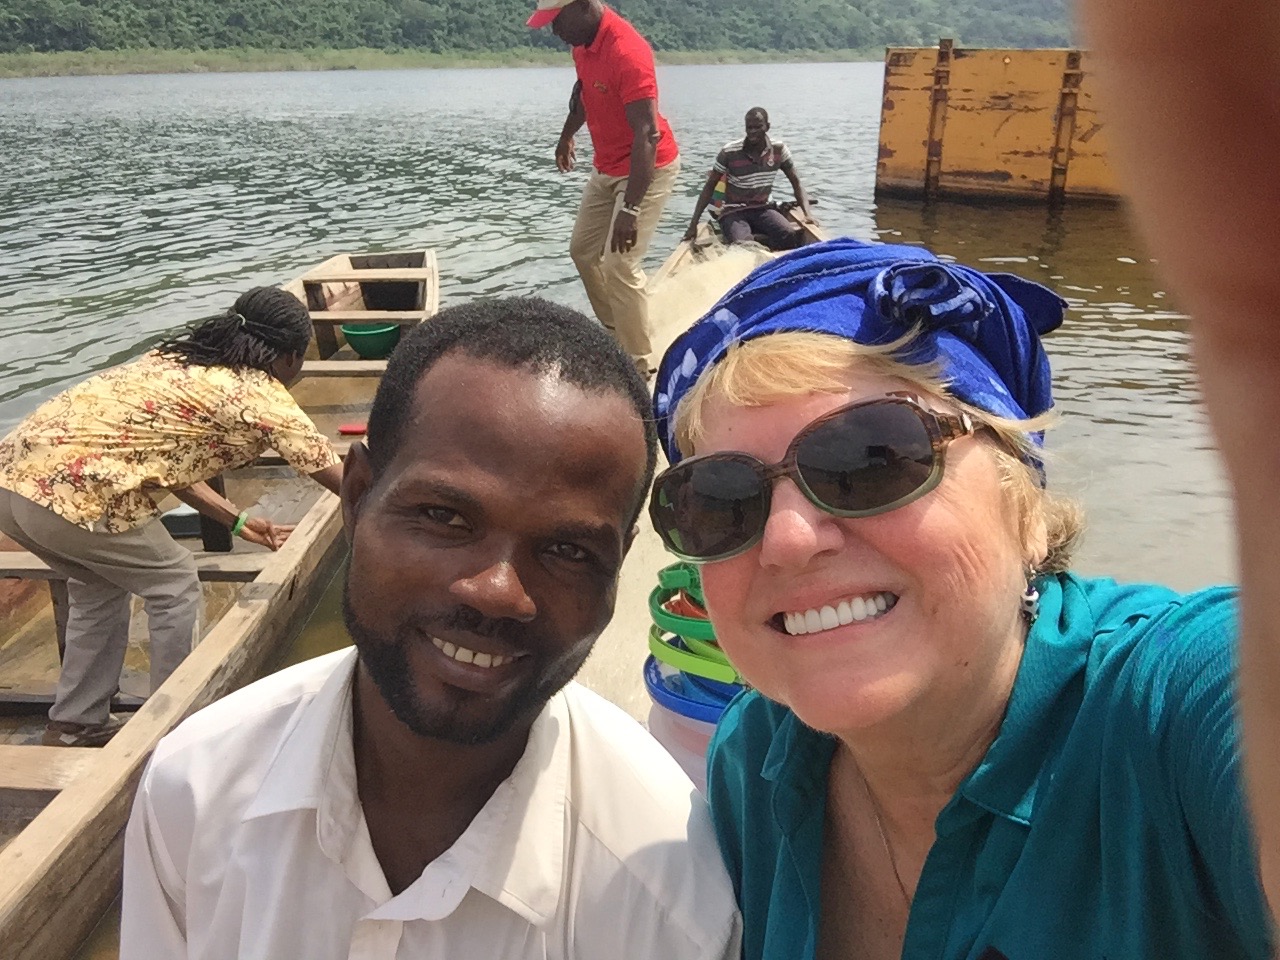 Selfie of a woman with a Ghanian man